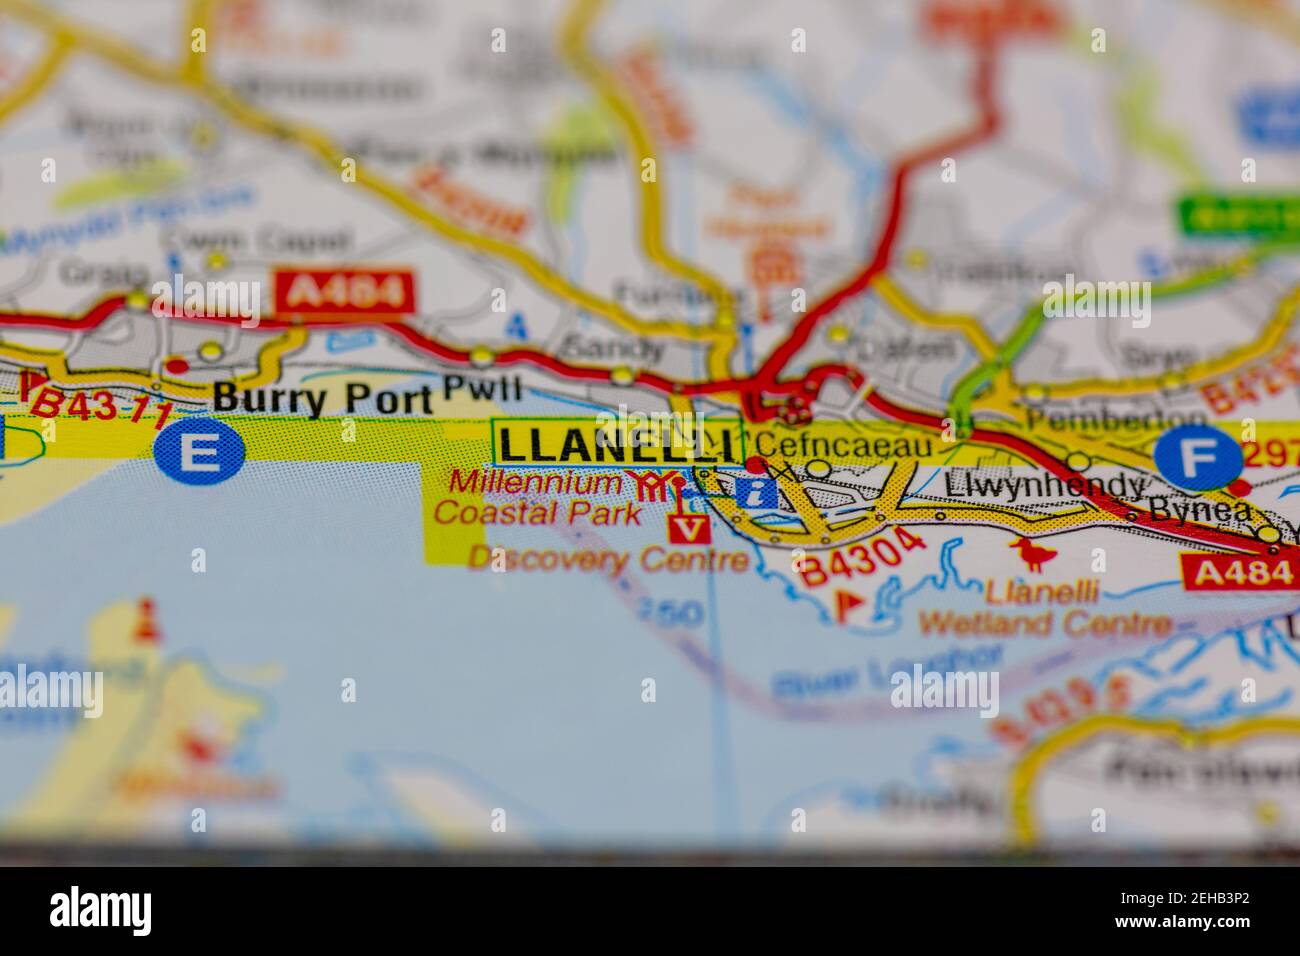 Llanelli and surrounding areas shown on a road map or Geography map Stock Photo